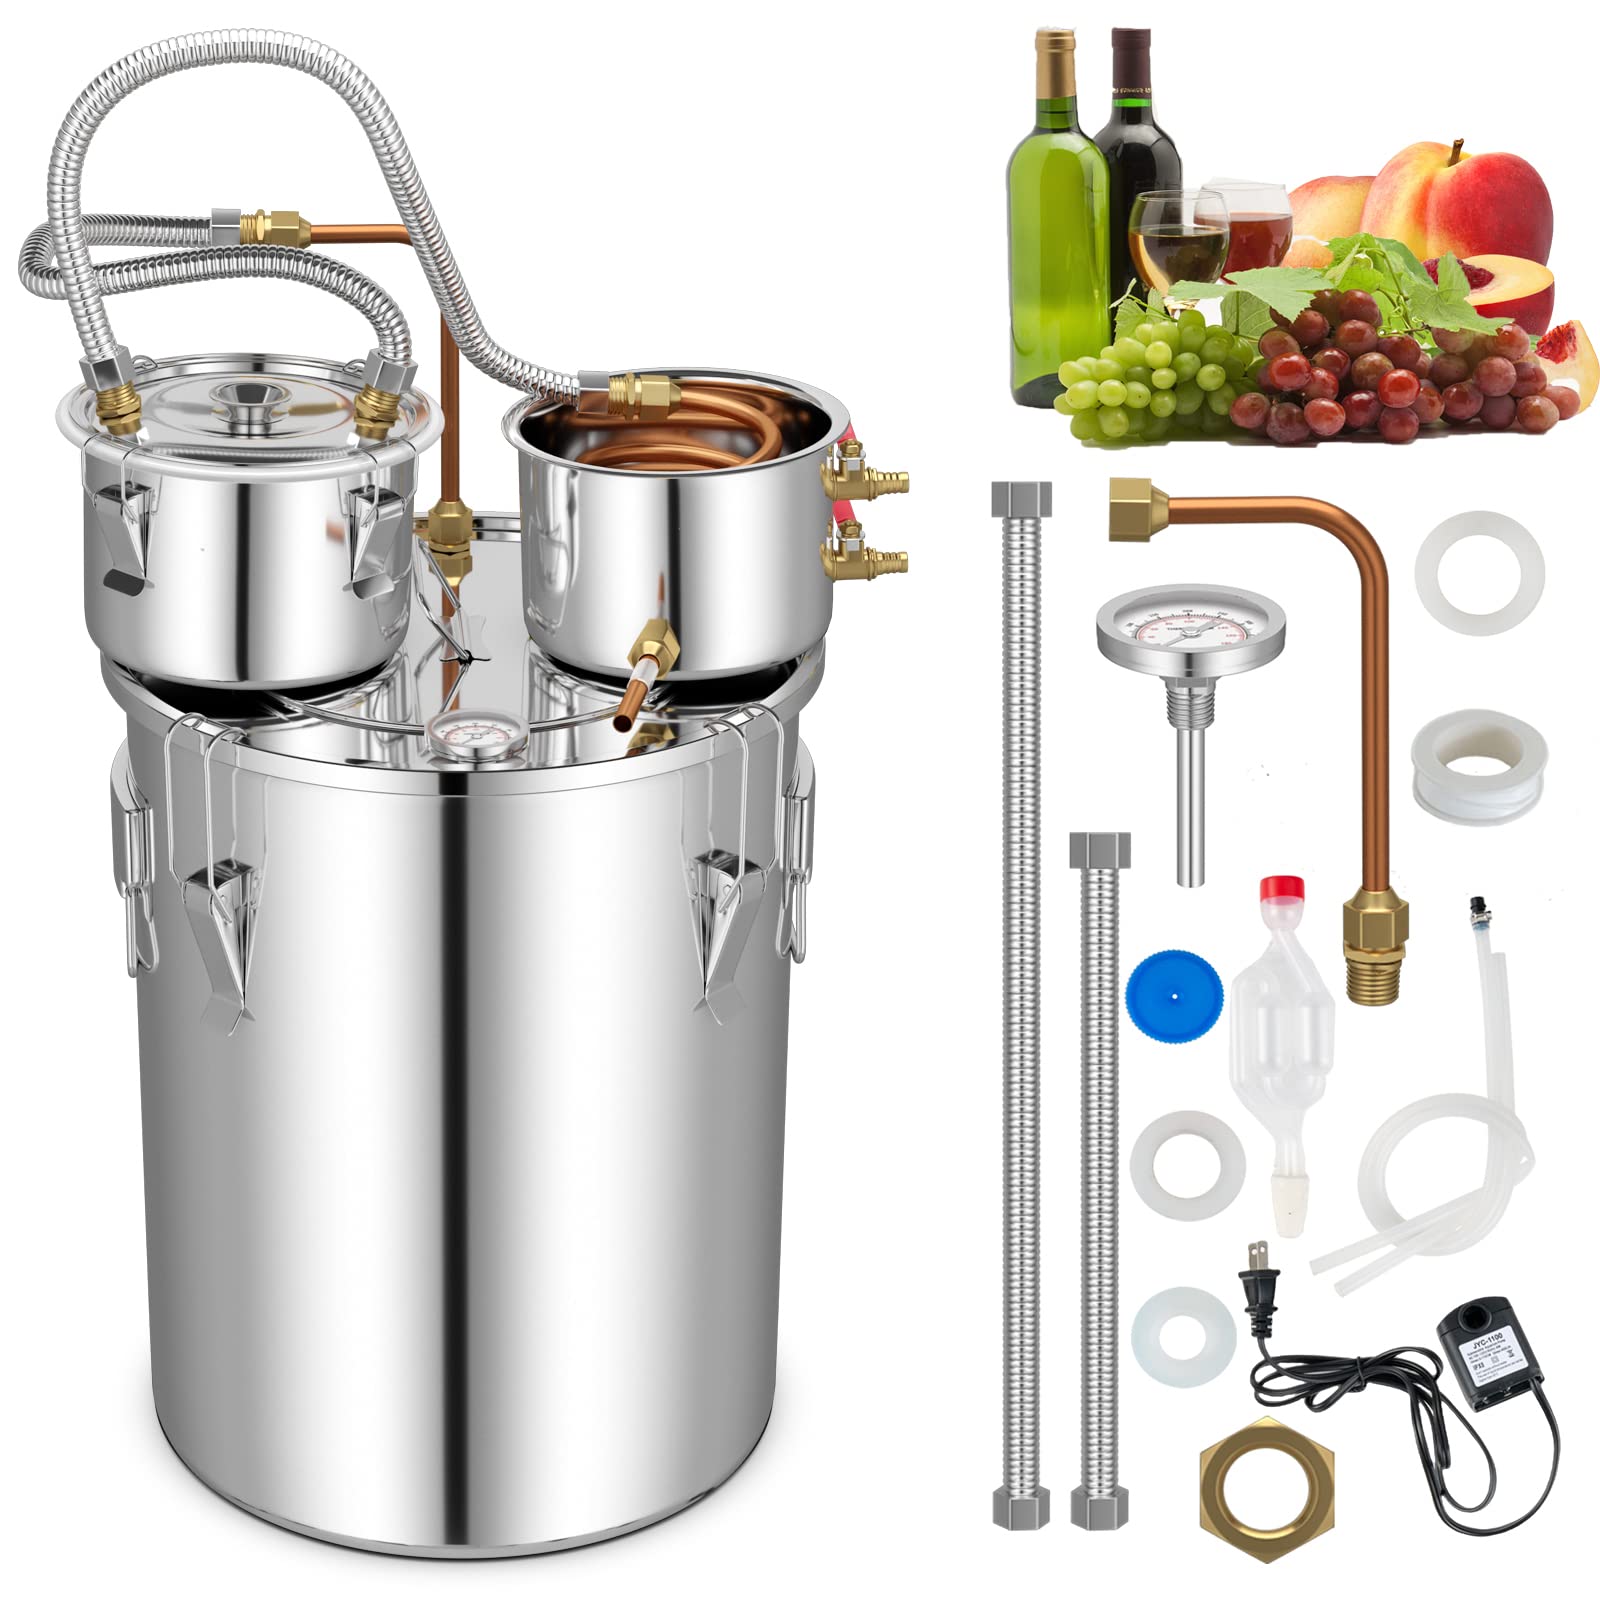 PETSITE 11-Quart Steam Juicer Stainless Steel, Steamer Extractor Pot for  Fruit Vegetable Canning with Tempered Glass Lid, Hose, Clamp, Loop Handles